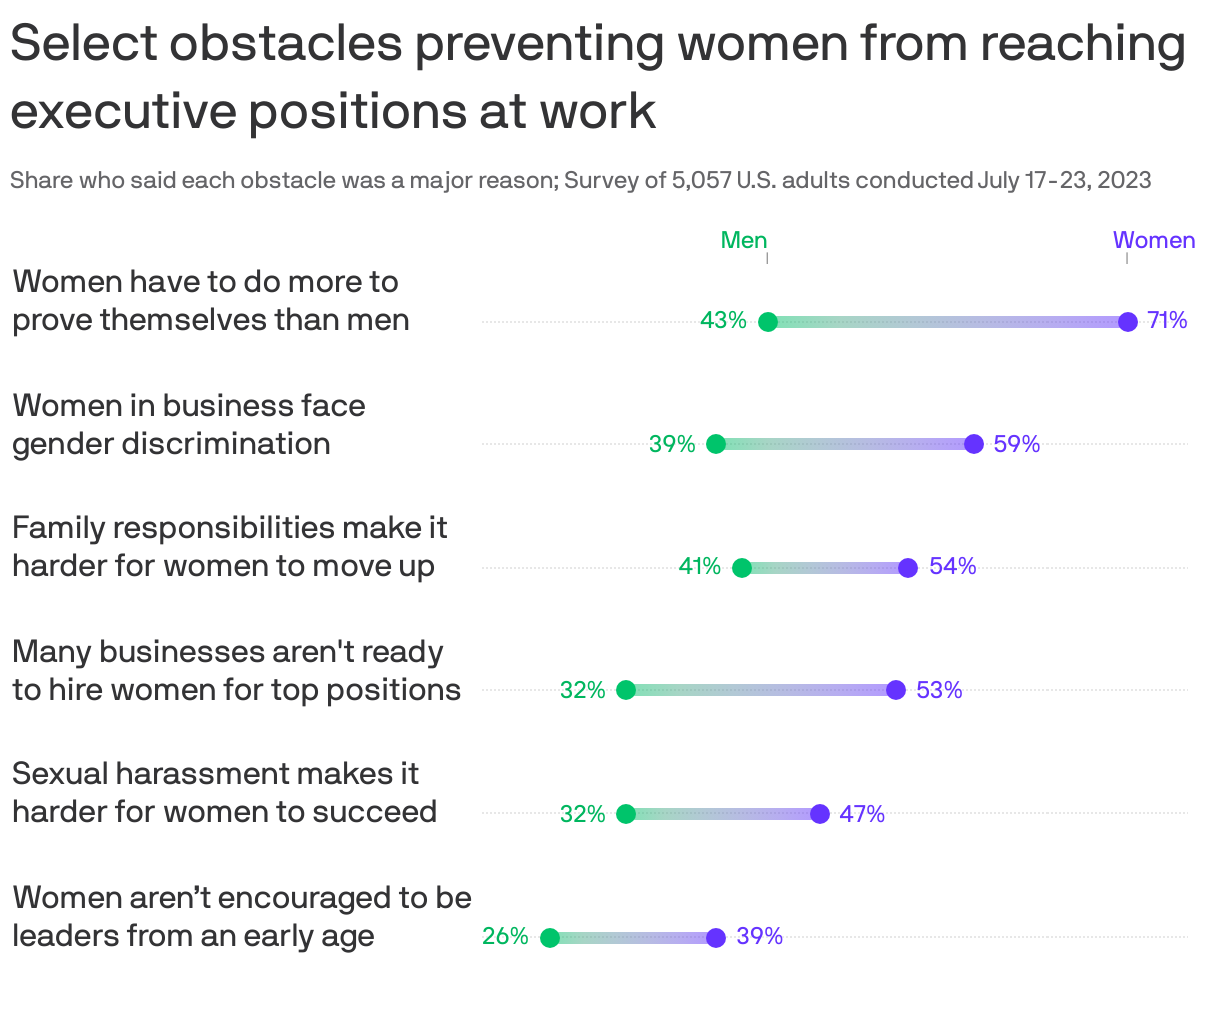 Select obstacles preventing women from reaching executive positions at work